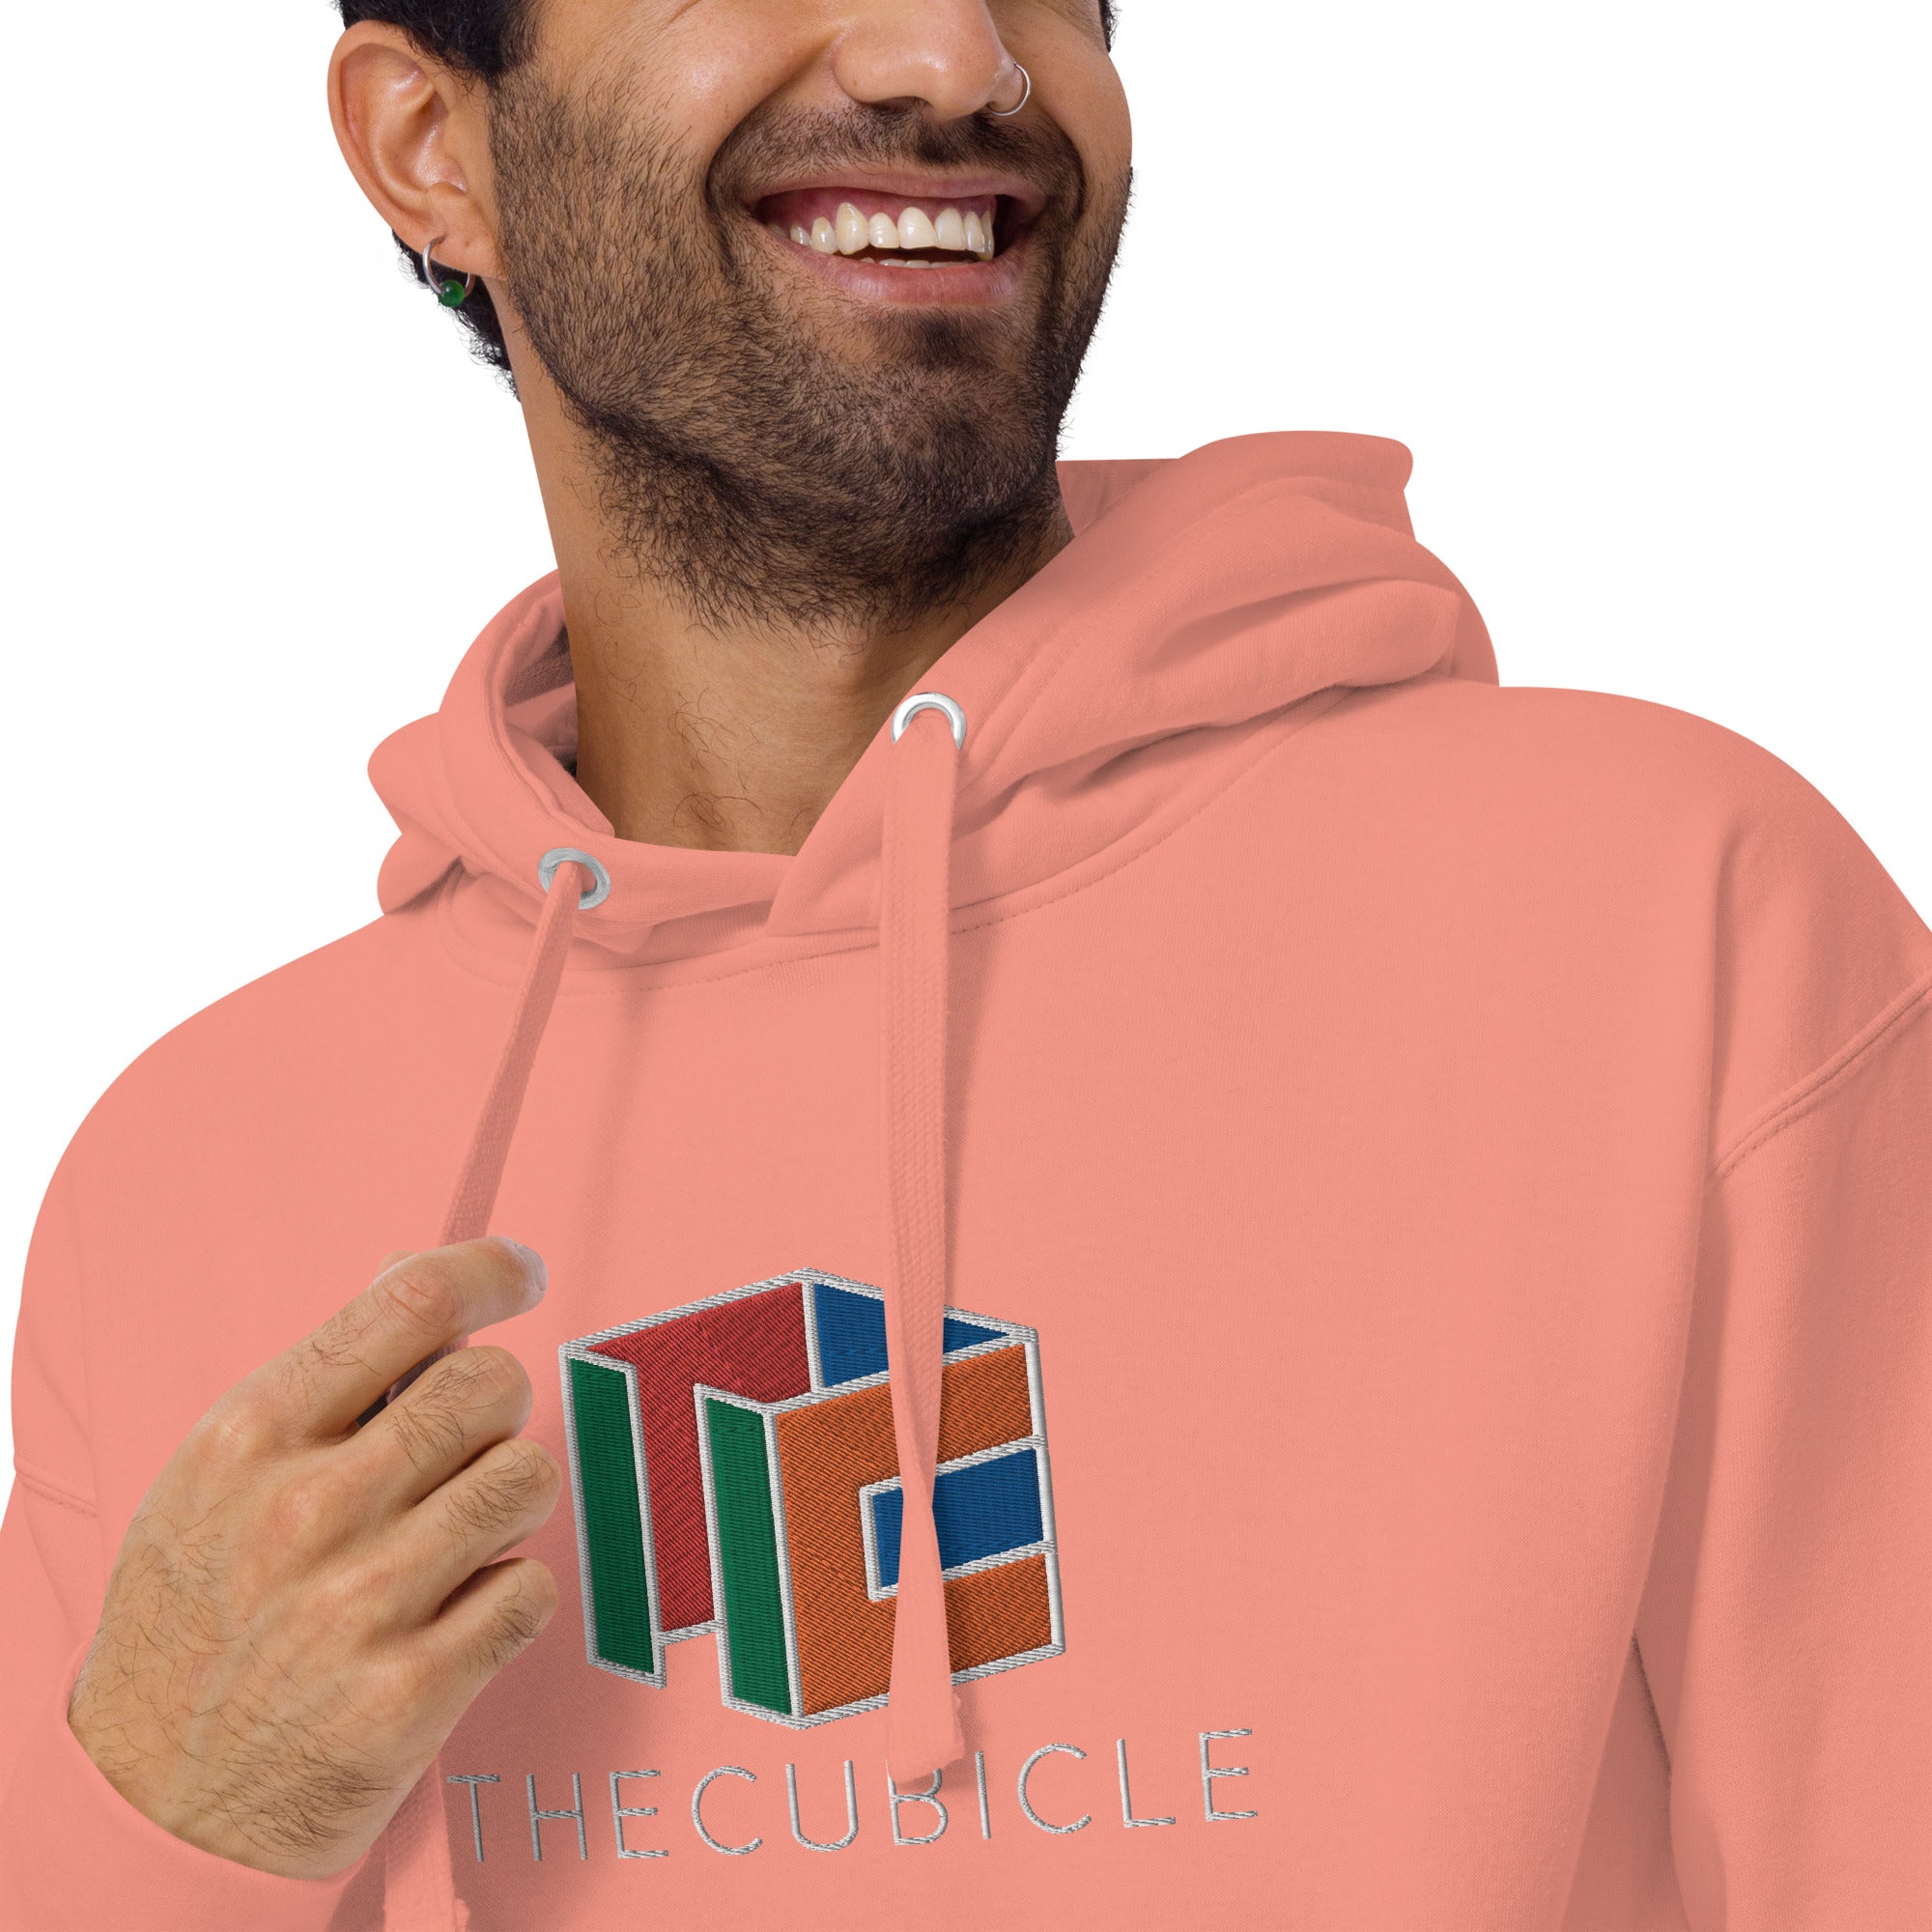 Cubicle 2022 Embroidered Hoodie